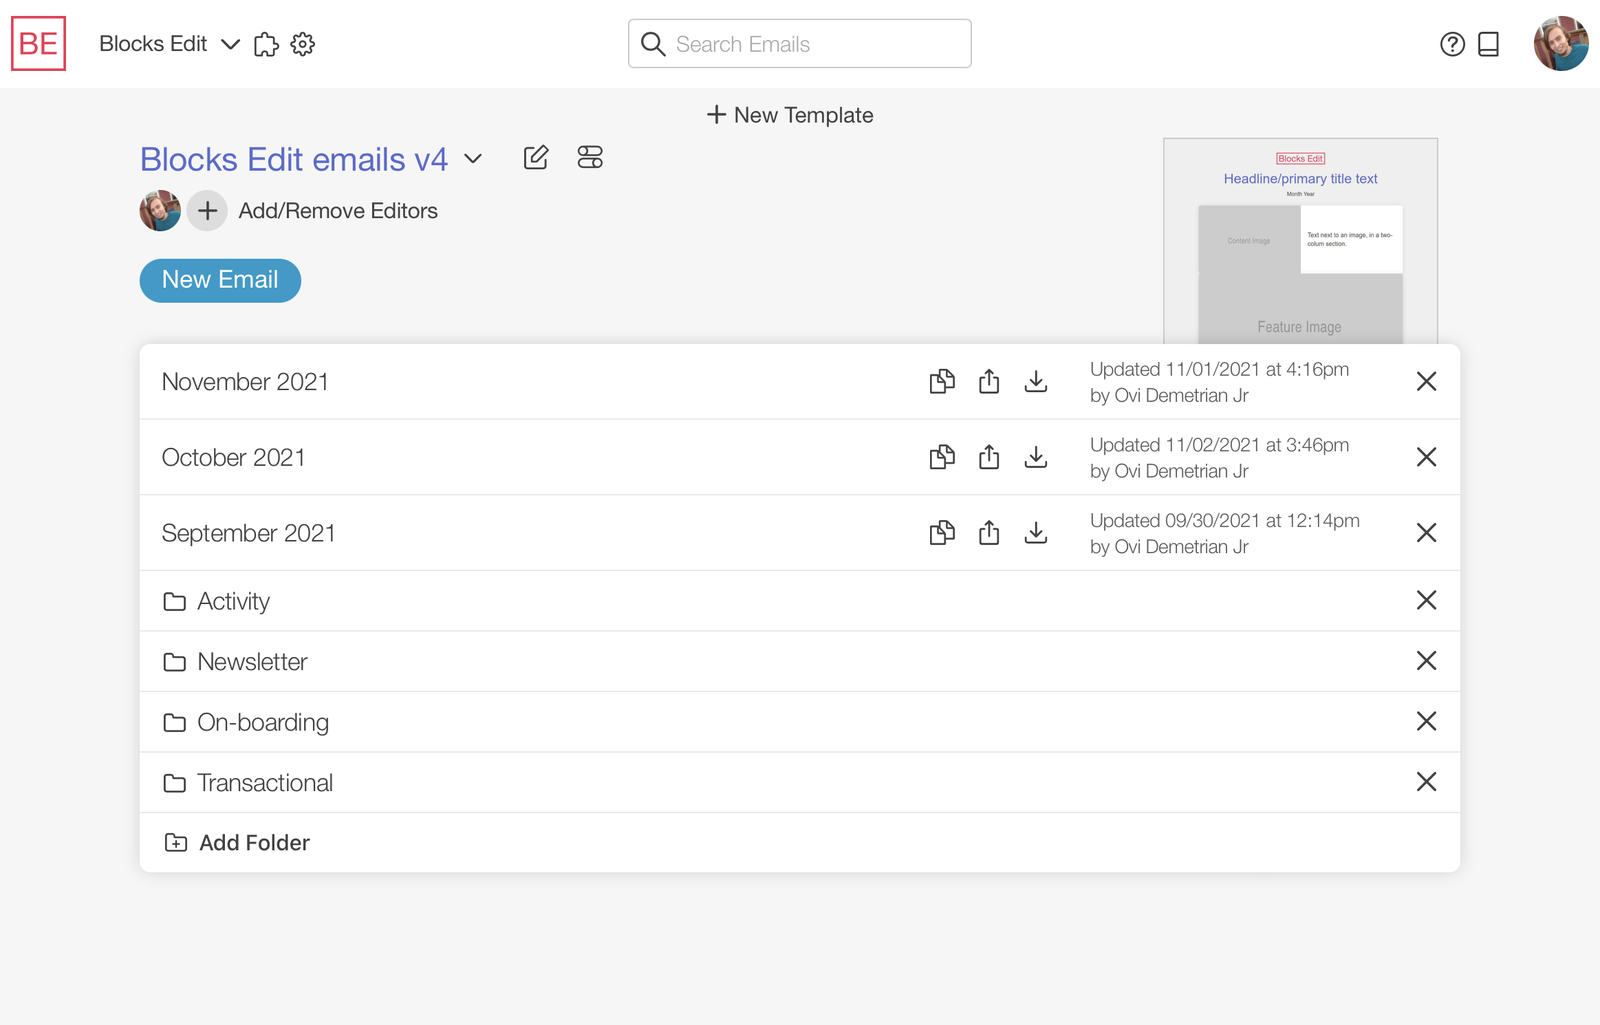 Screenshot of the redesigned Blocks Edit dashboard showing the template view with emails and folders.